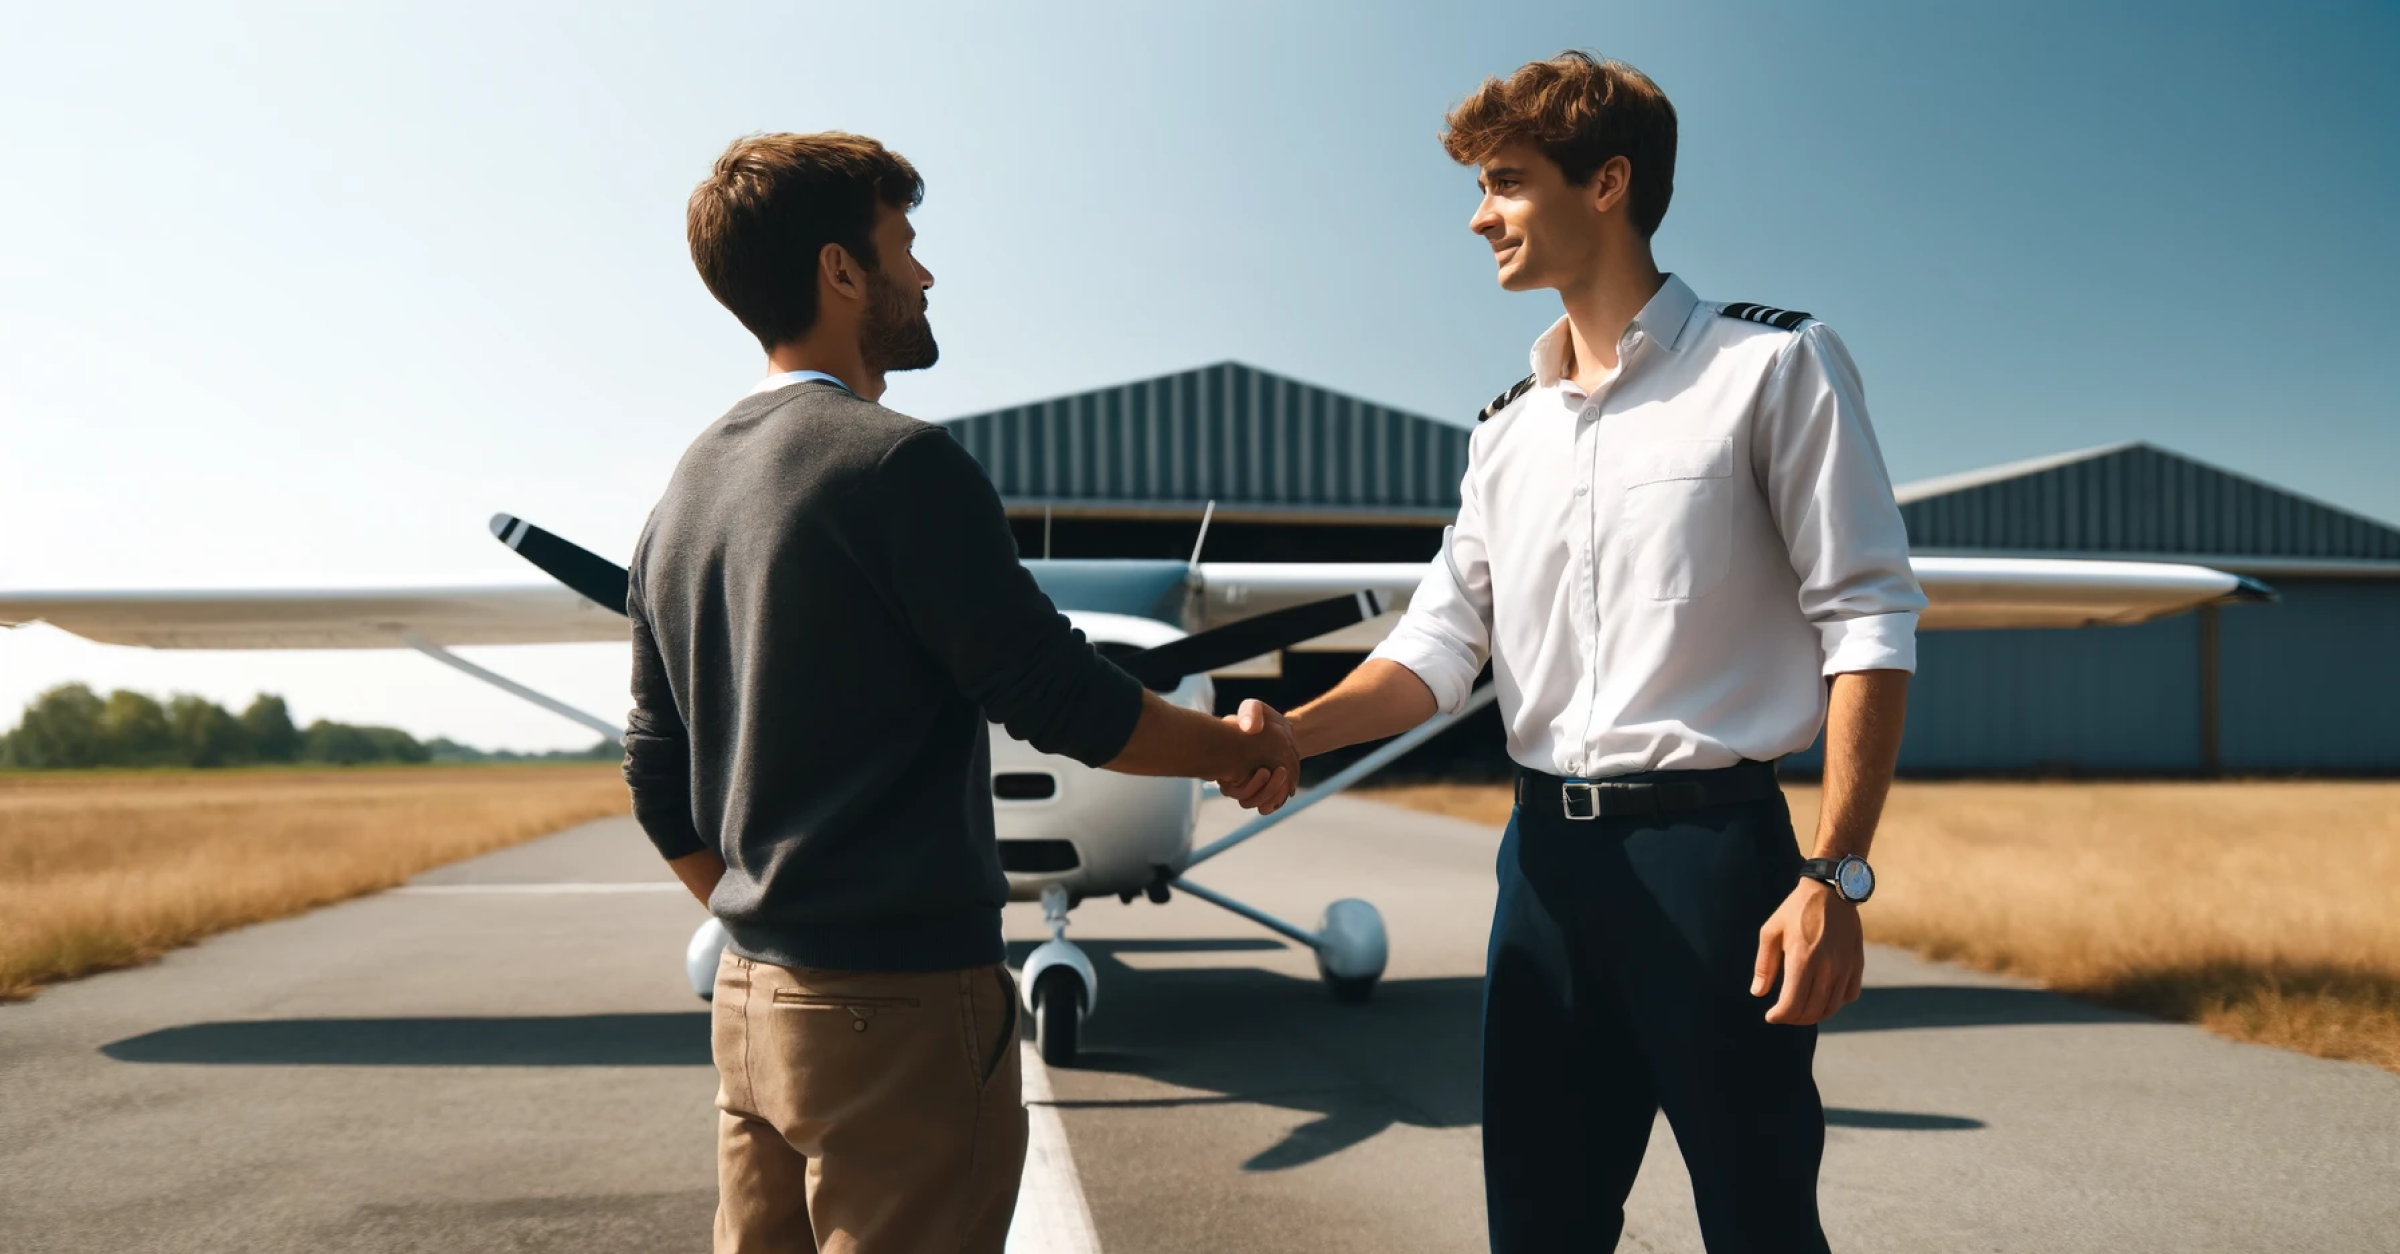 Run your aviation business with ease